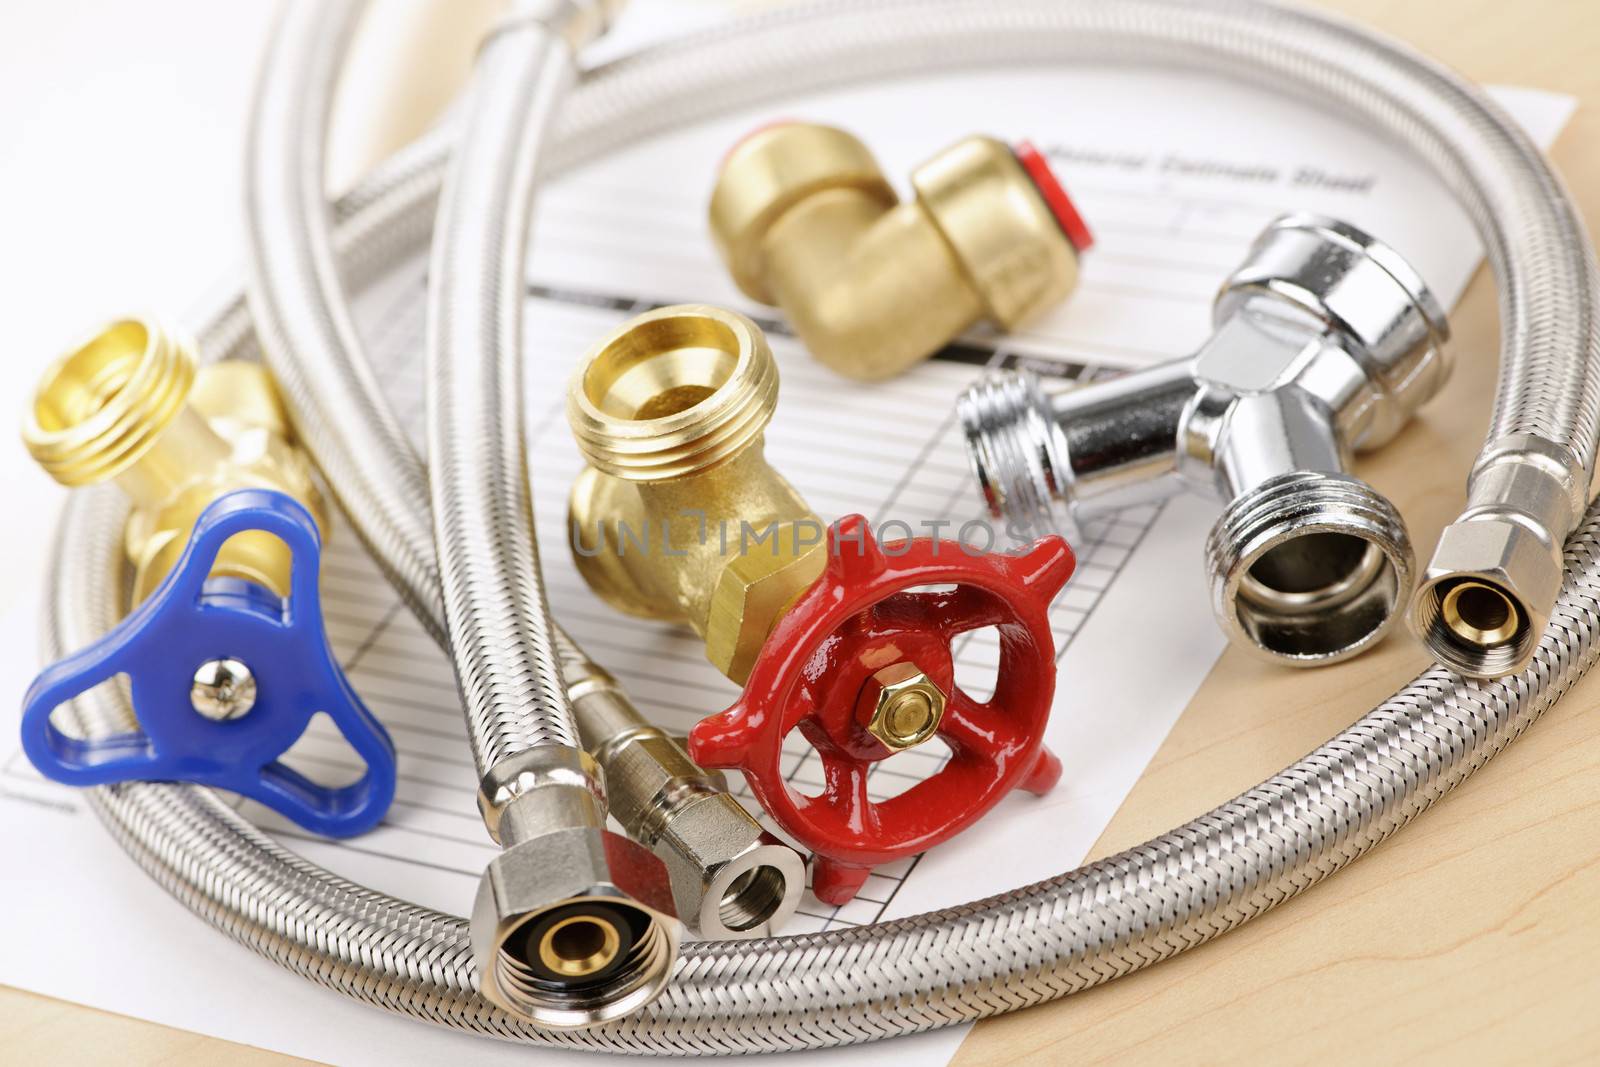 Plumbing valves hoses and assorted parts with estimate sheet